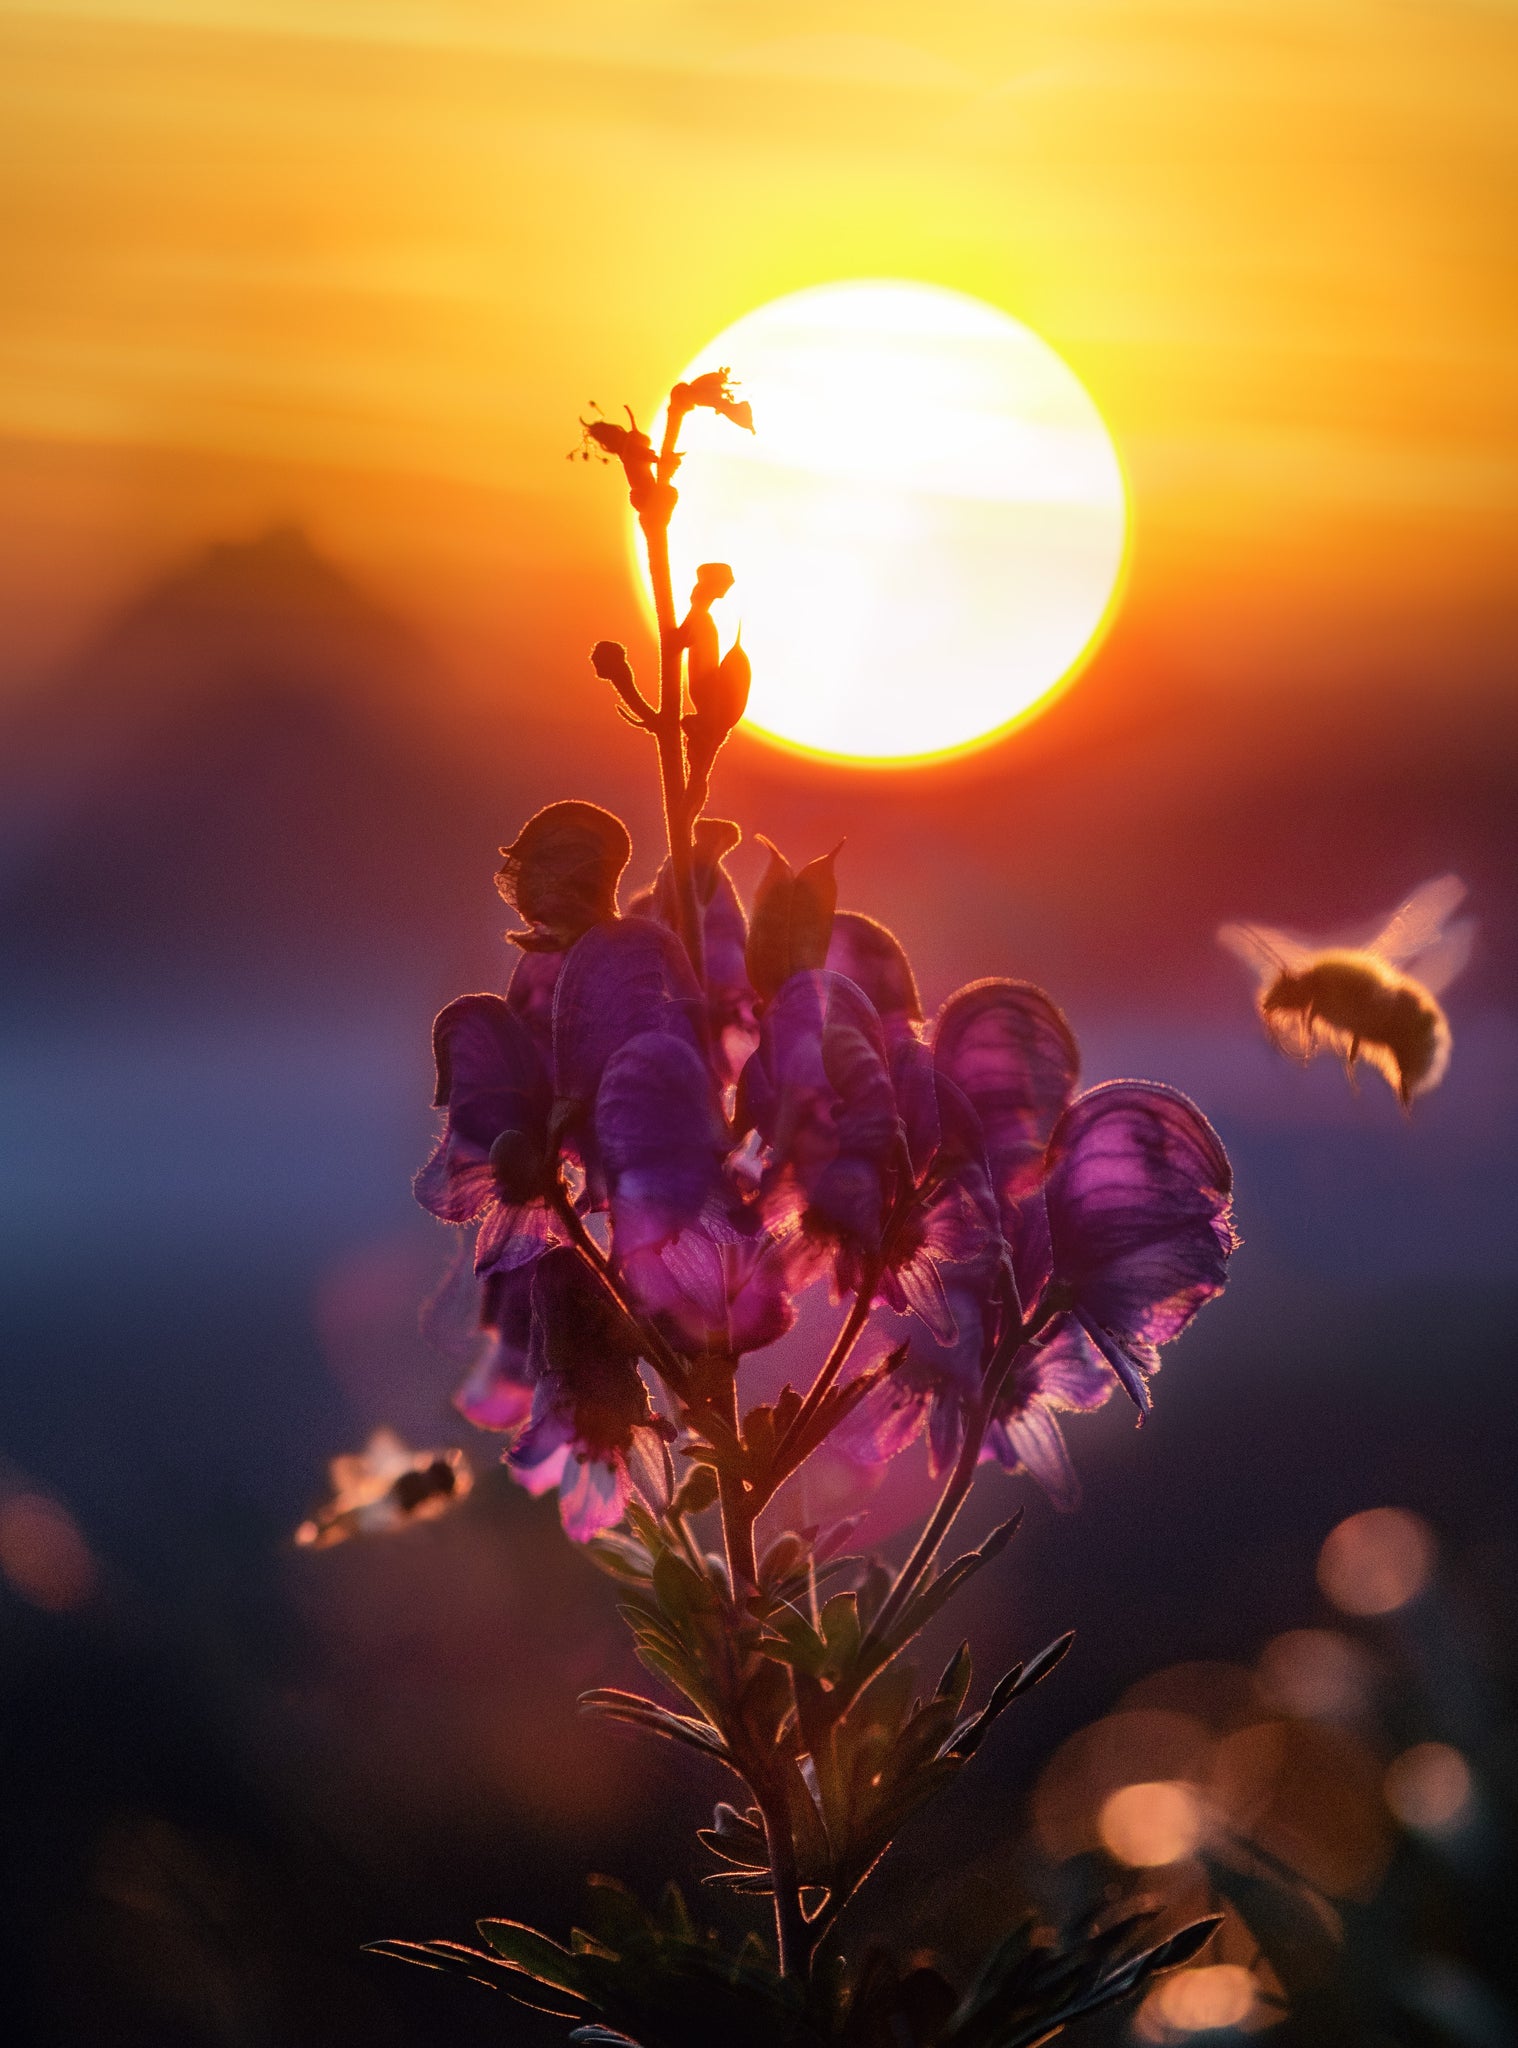 Honeybee with flower at sunset